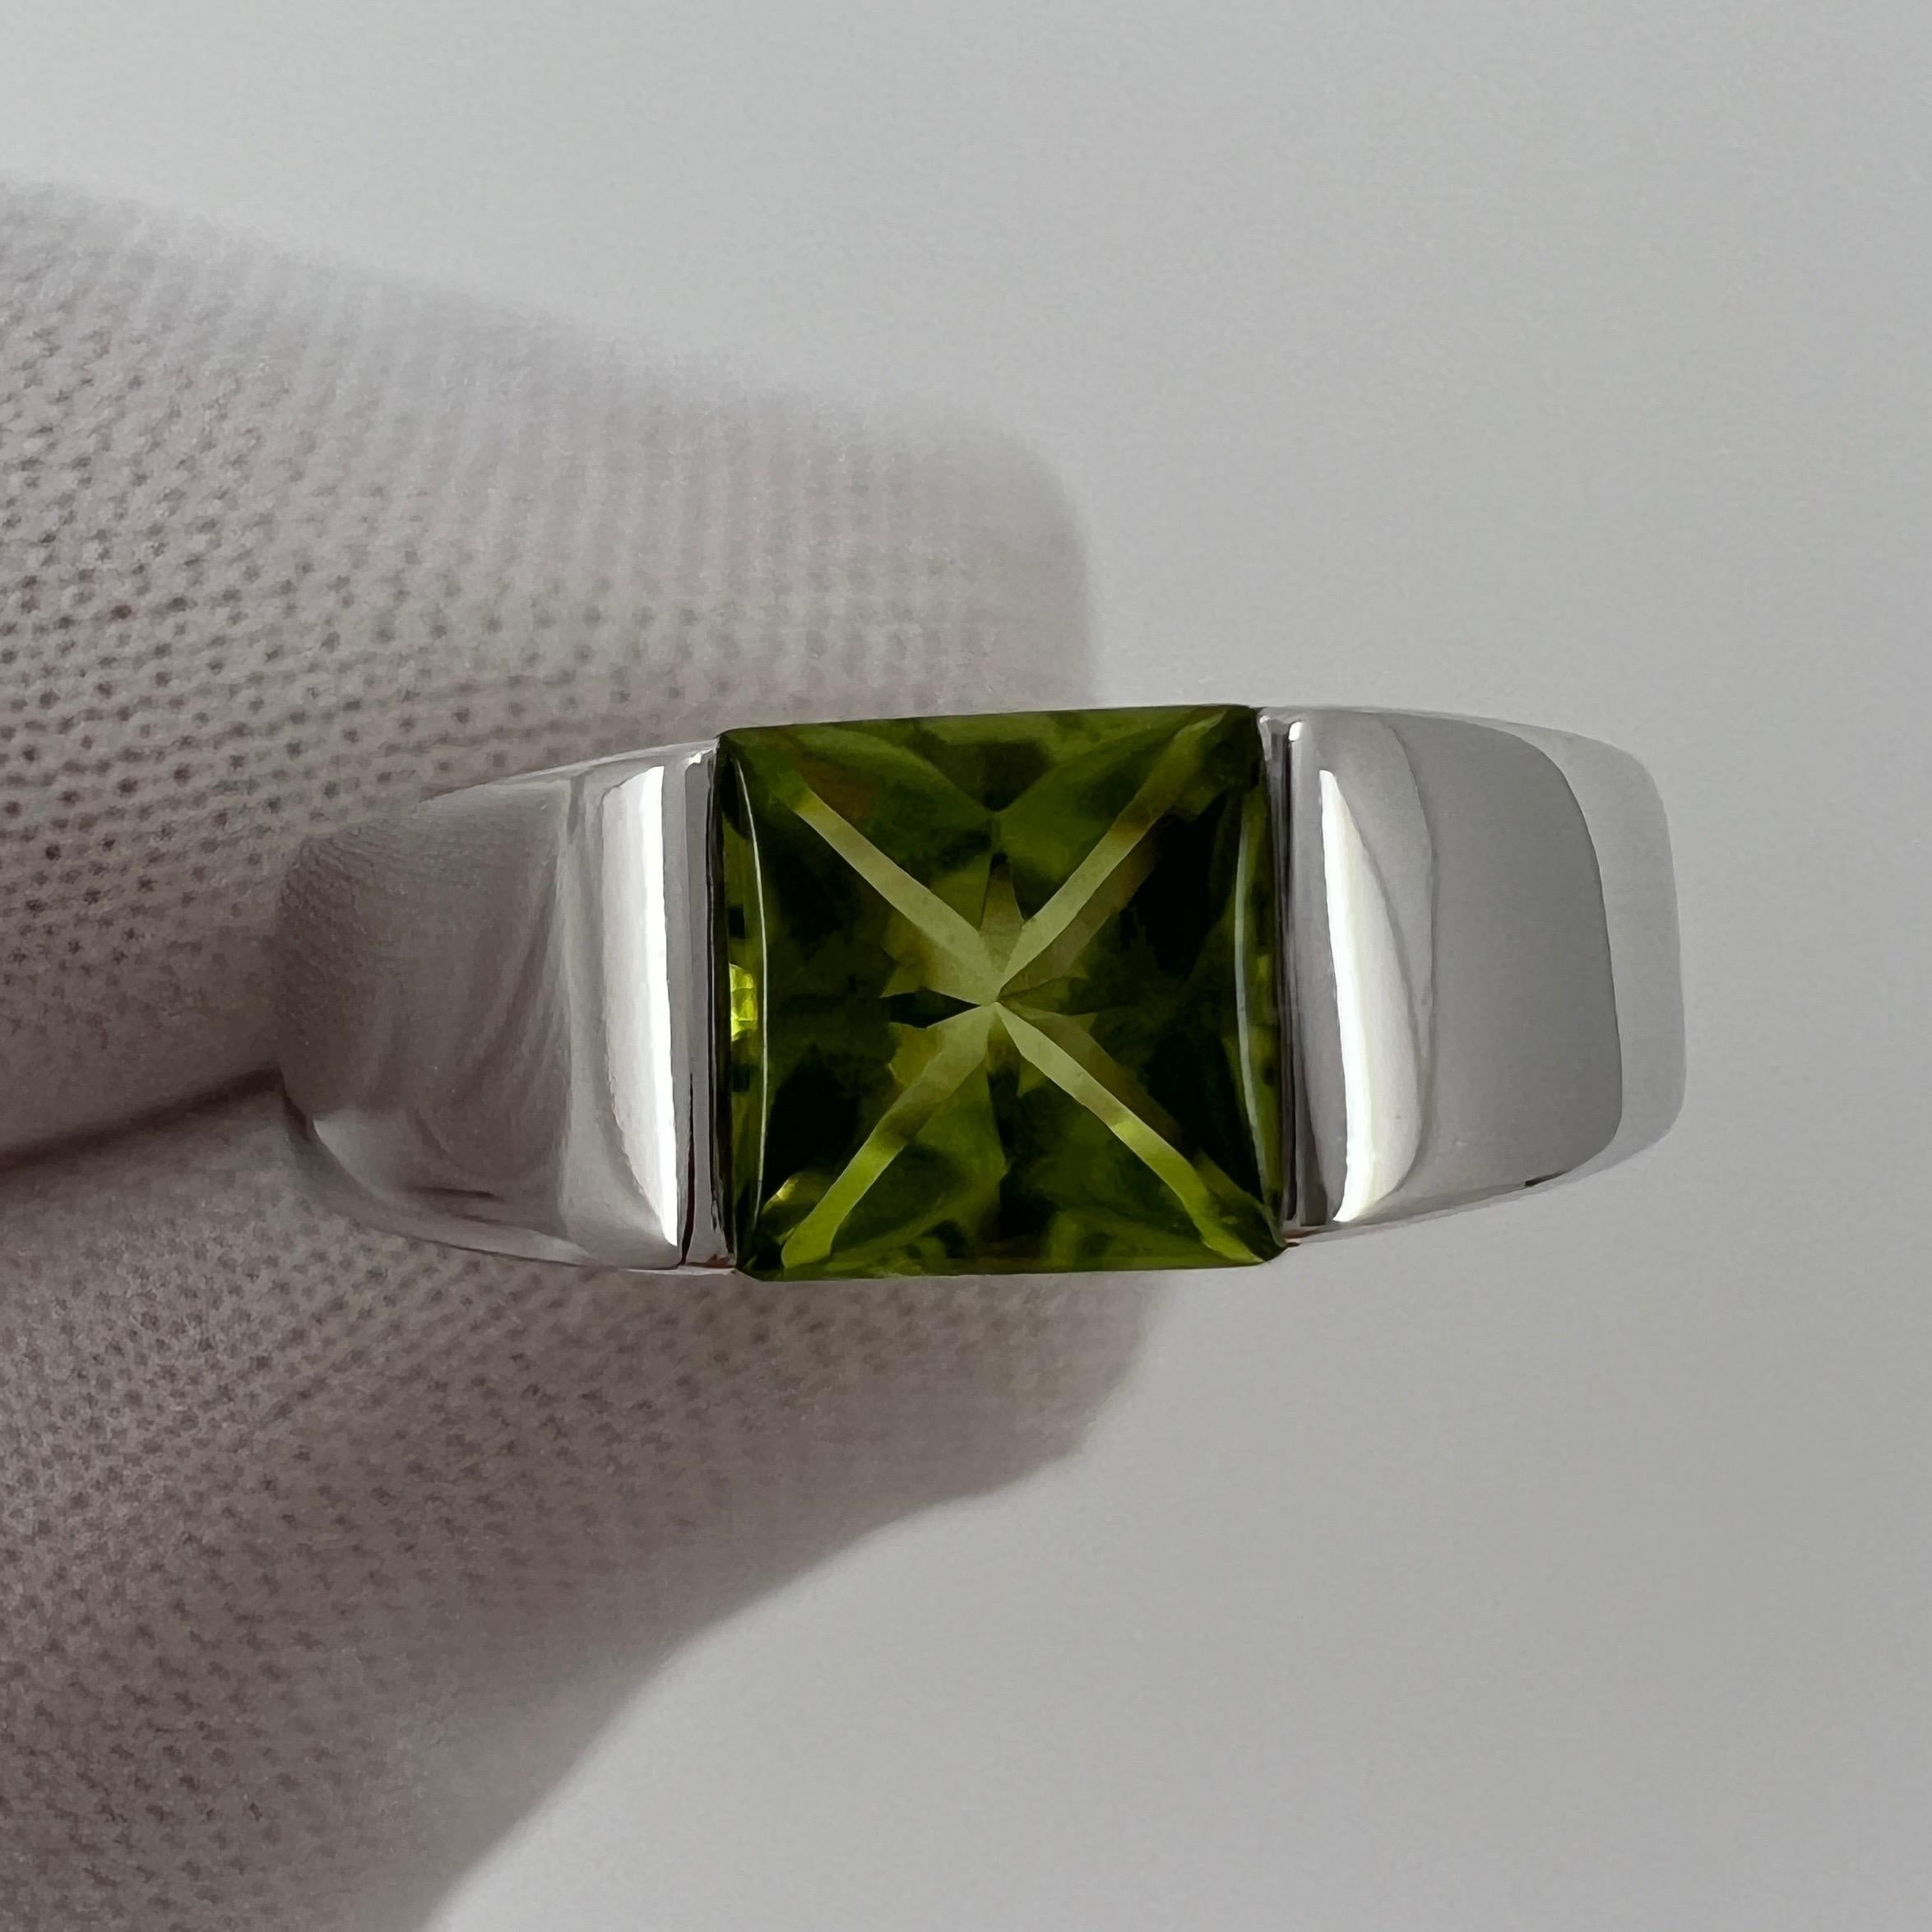 Vintage Cartier Vivid Green Peridot 18 Karat White Gold Tank Ring.

Stunning white gold ring with a 6mm tension set vivid green peridot. 
Fine jewellery houses like Cartier only use the finest of gemstones and this peridot is no exception. A top